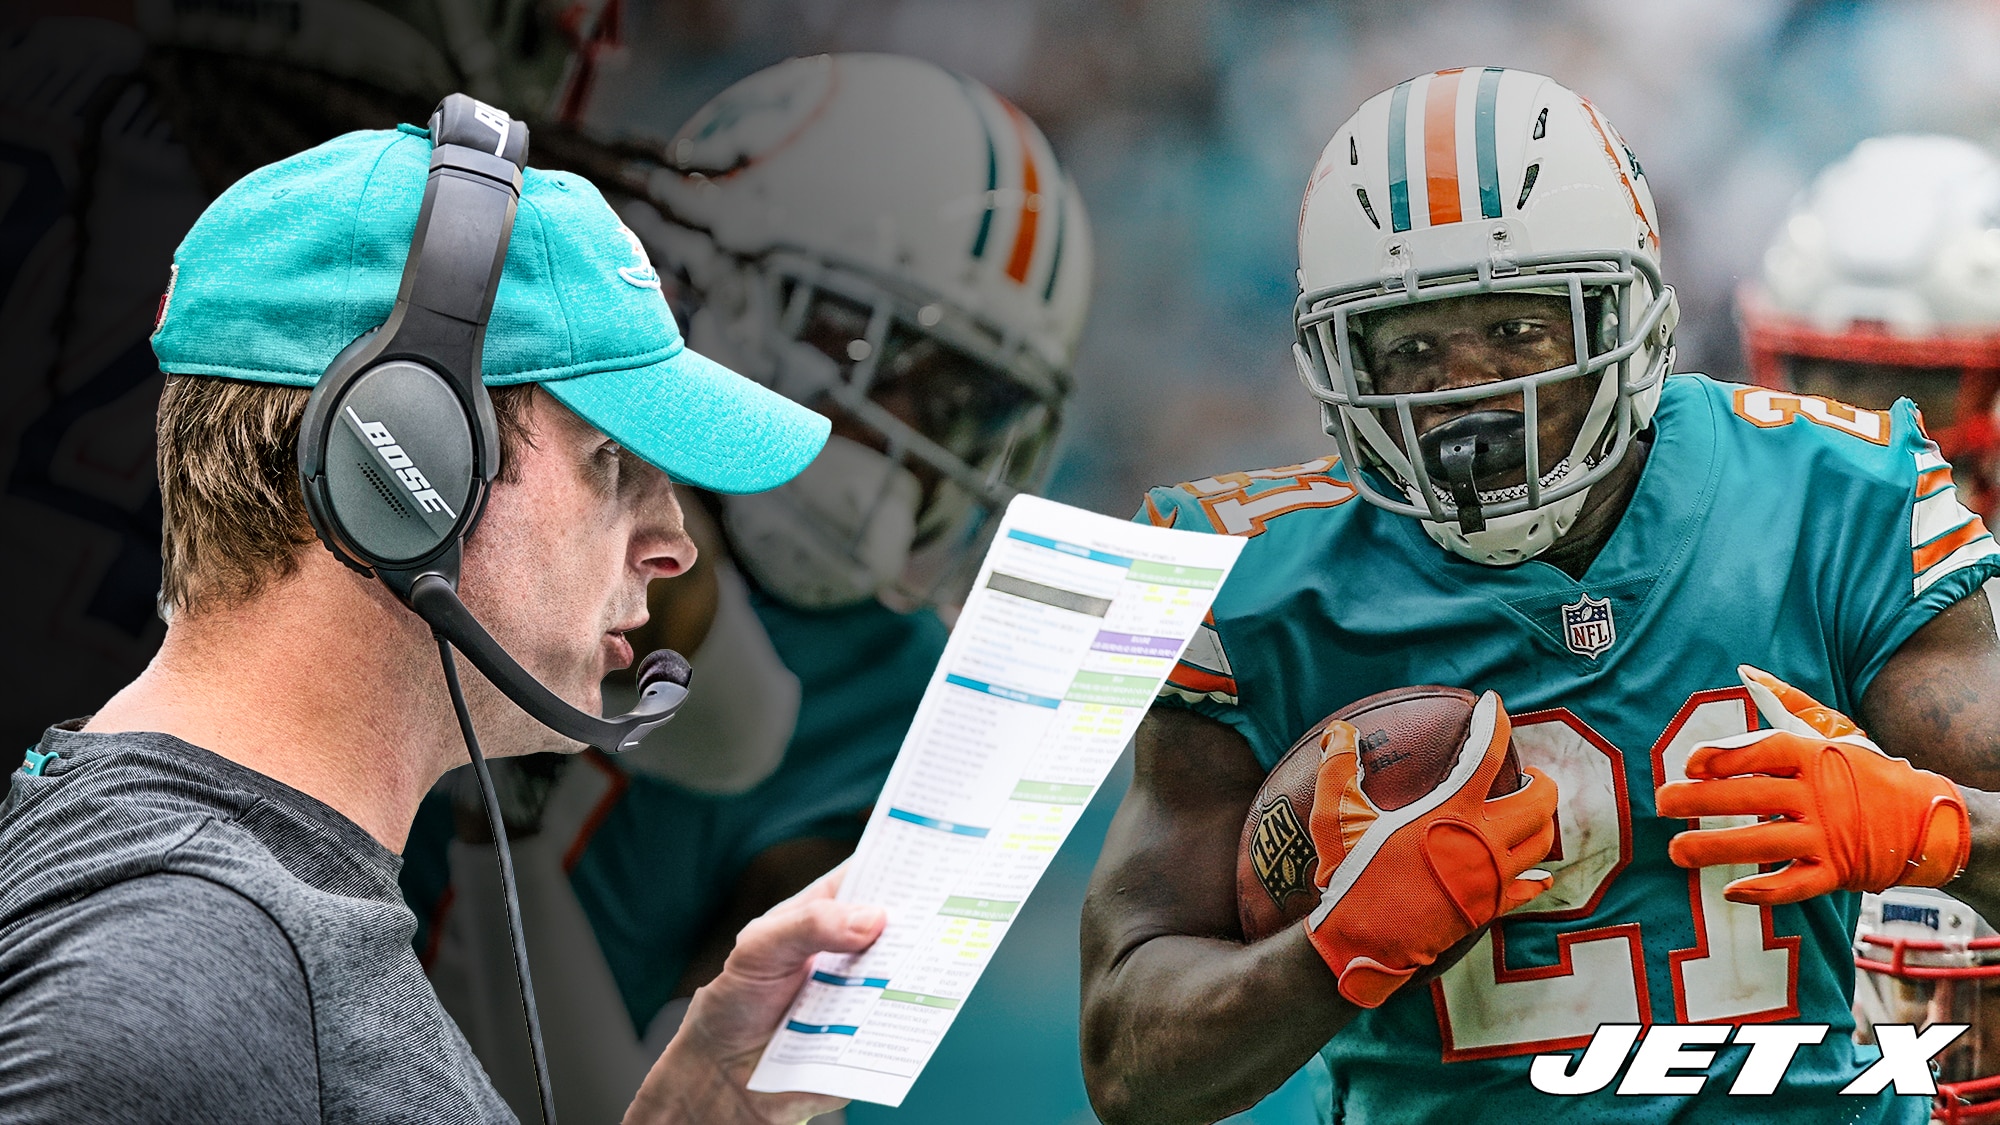 Dolphins' Gore future undecided after another massive game